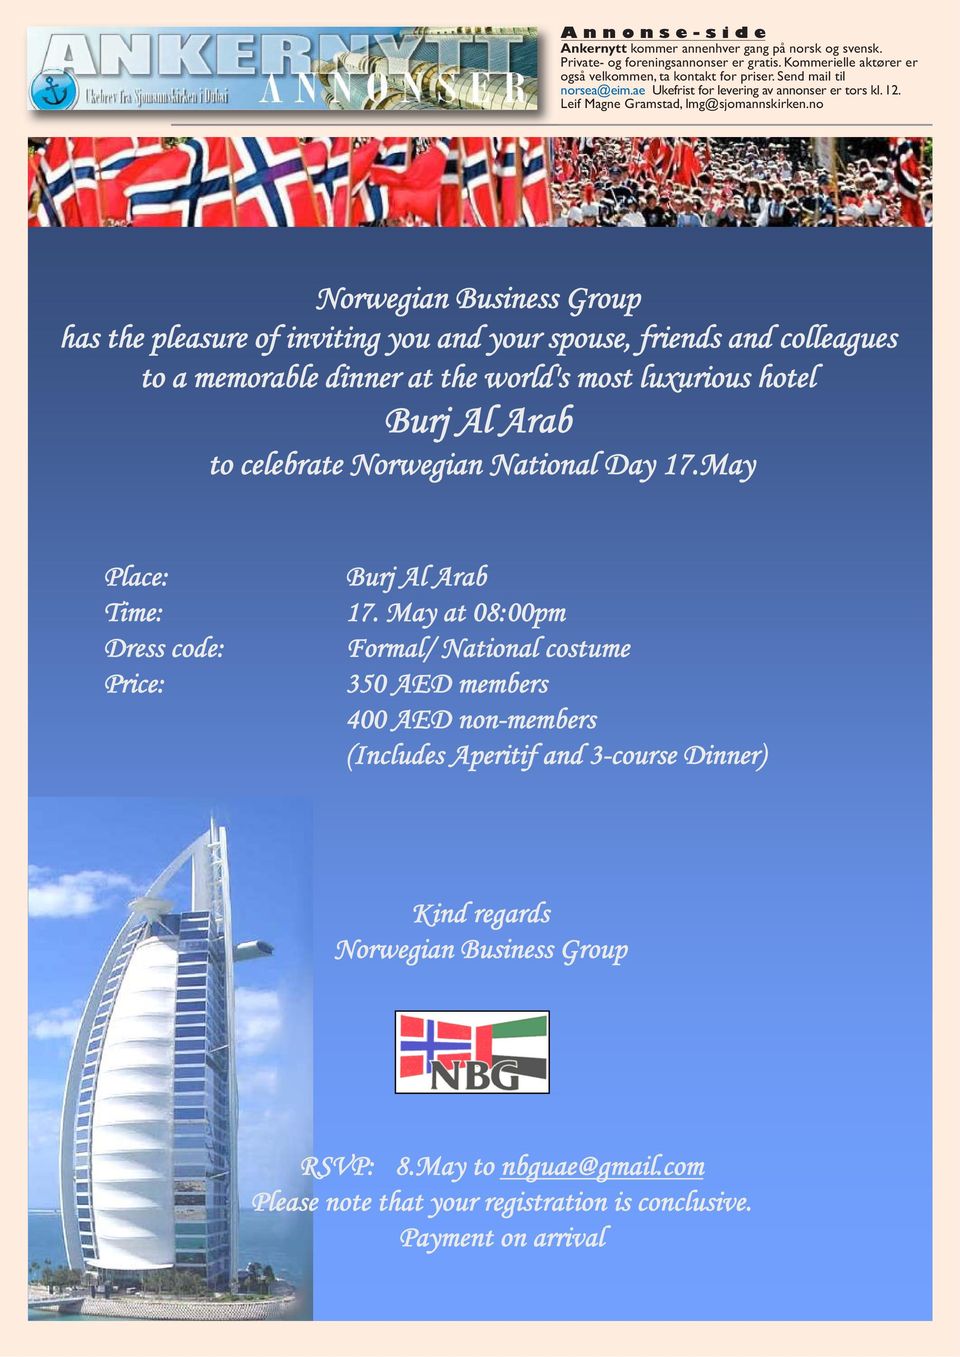 no Norwegian Business Group has the pleasure of inviting you and your spouse, friends and colleagues to a memorable dinner at the world's most luxurious hotel Burj Al Arab to celebrate Norwegian